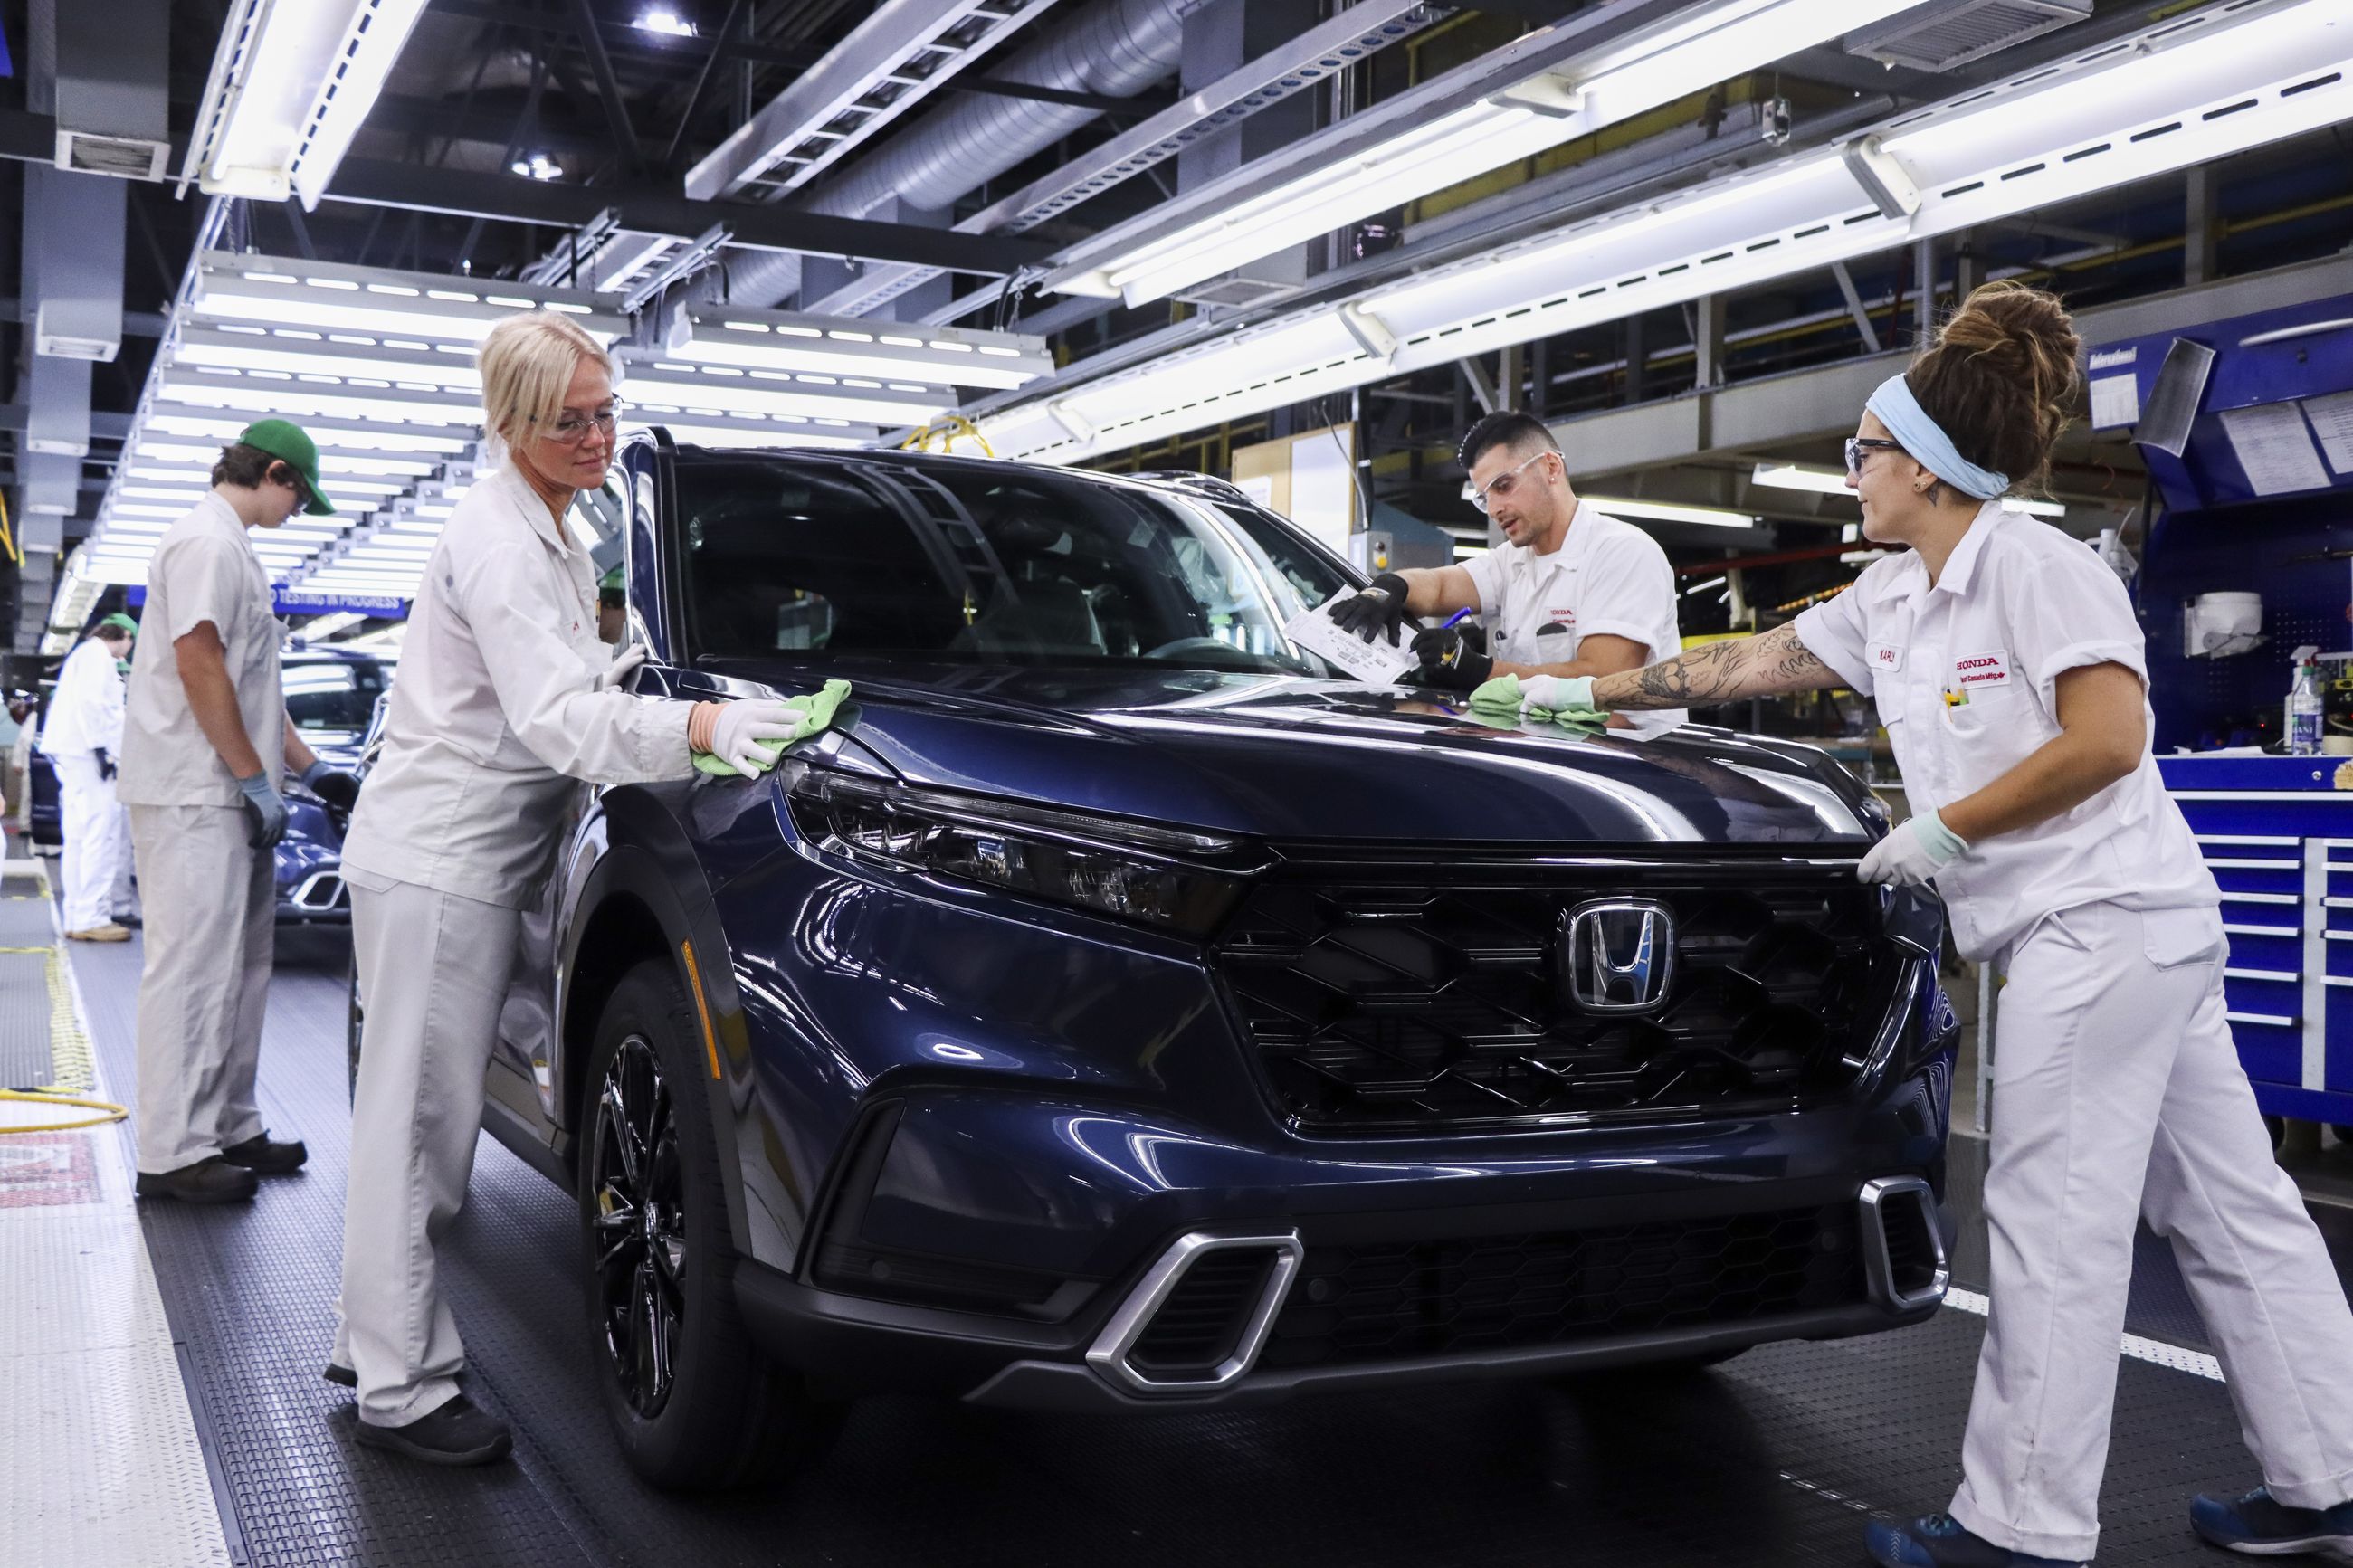 Celebrating a Huge Production Milestone Building its 10 Millionth Vehicle in Canada